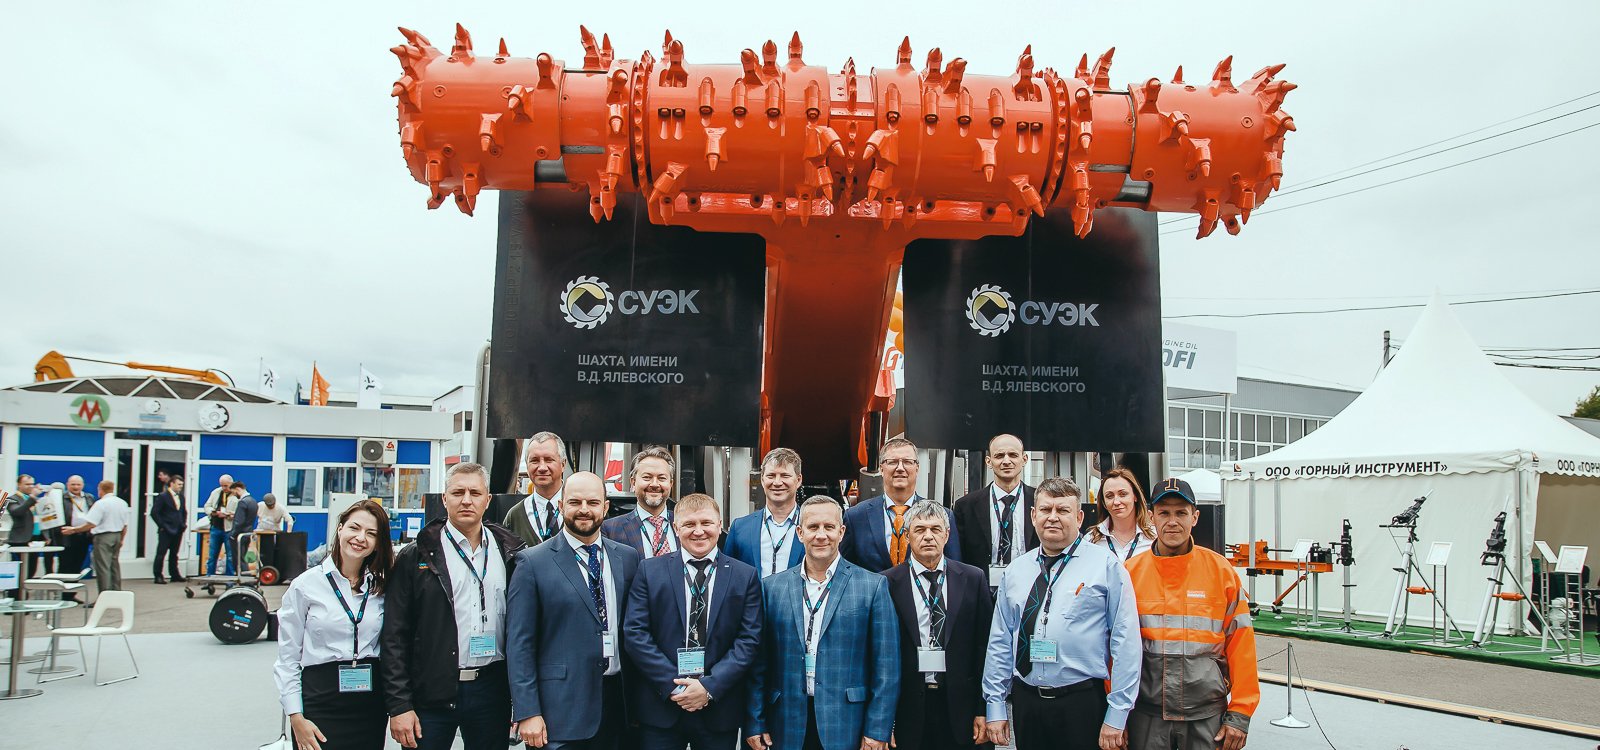 <p>Representatives from Sandvik Mining and Rock Technology present an MB670-1 bolter miner to SUEK-Kuzbass JSC at the Ugol Rossii & Mining exhibition.</p>
